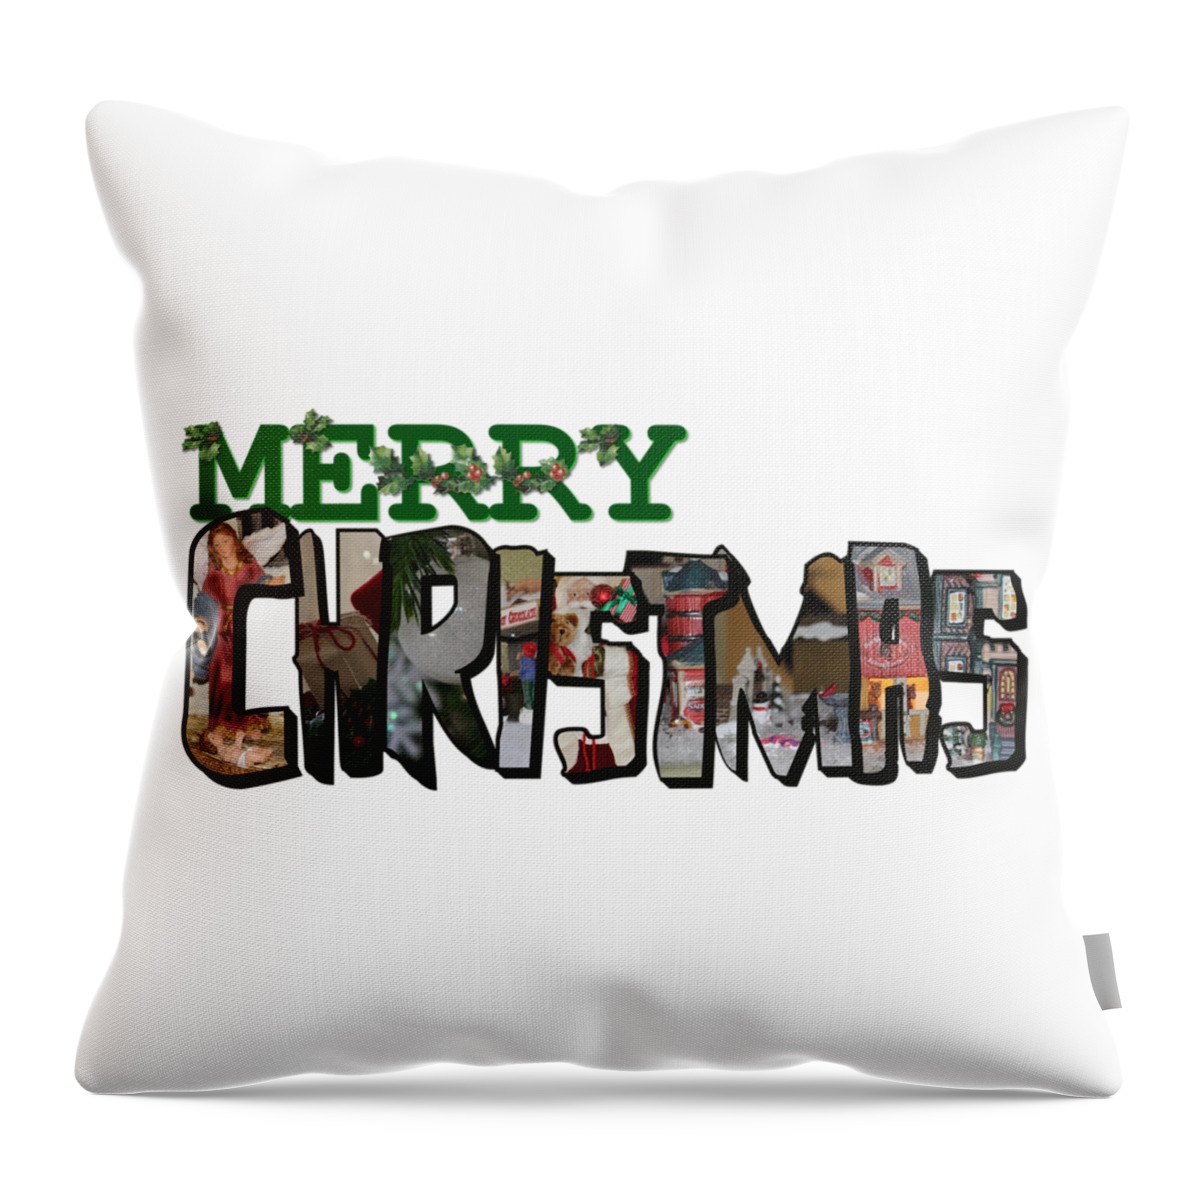 Big Letter Throw Pillow featuring the photograph Big Letter Merry Christmas by Colleen Cornelius